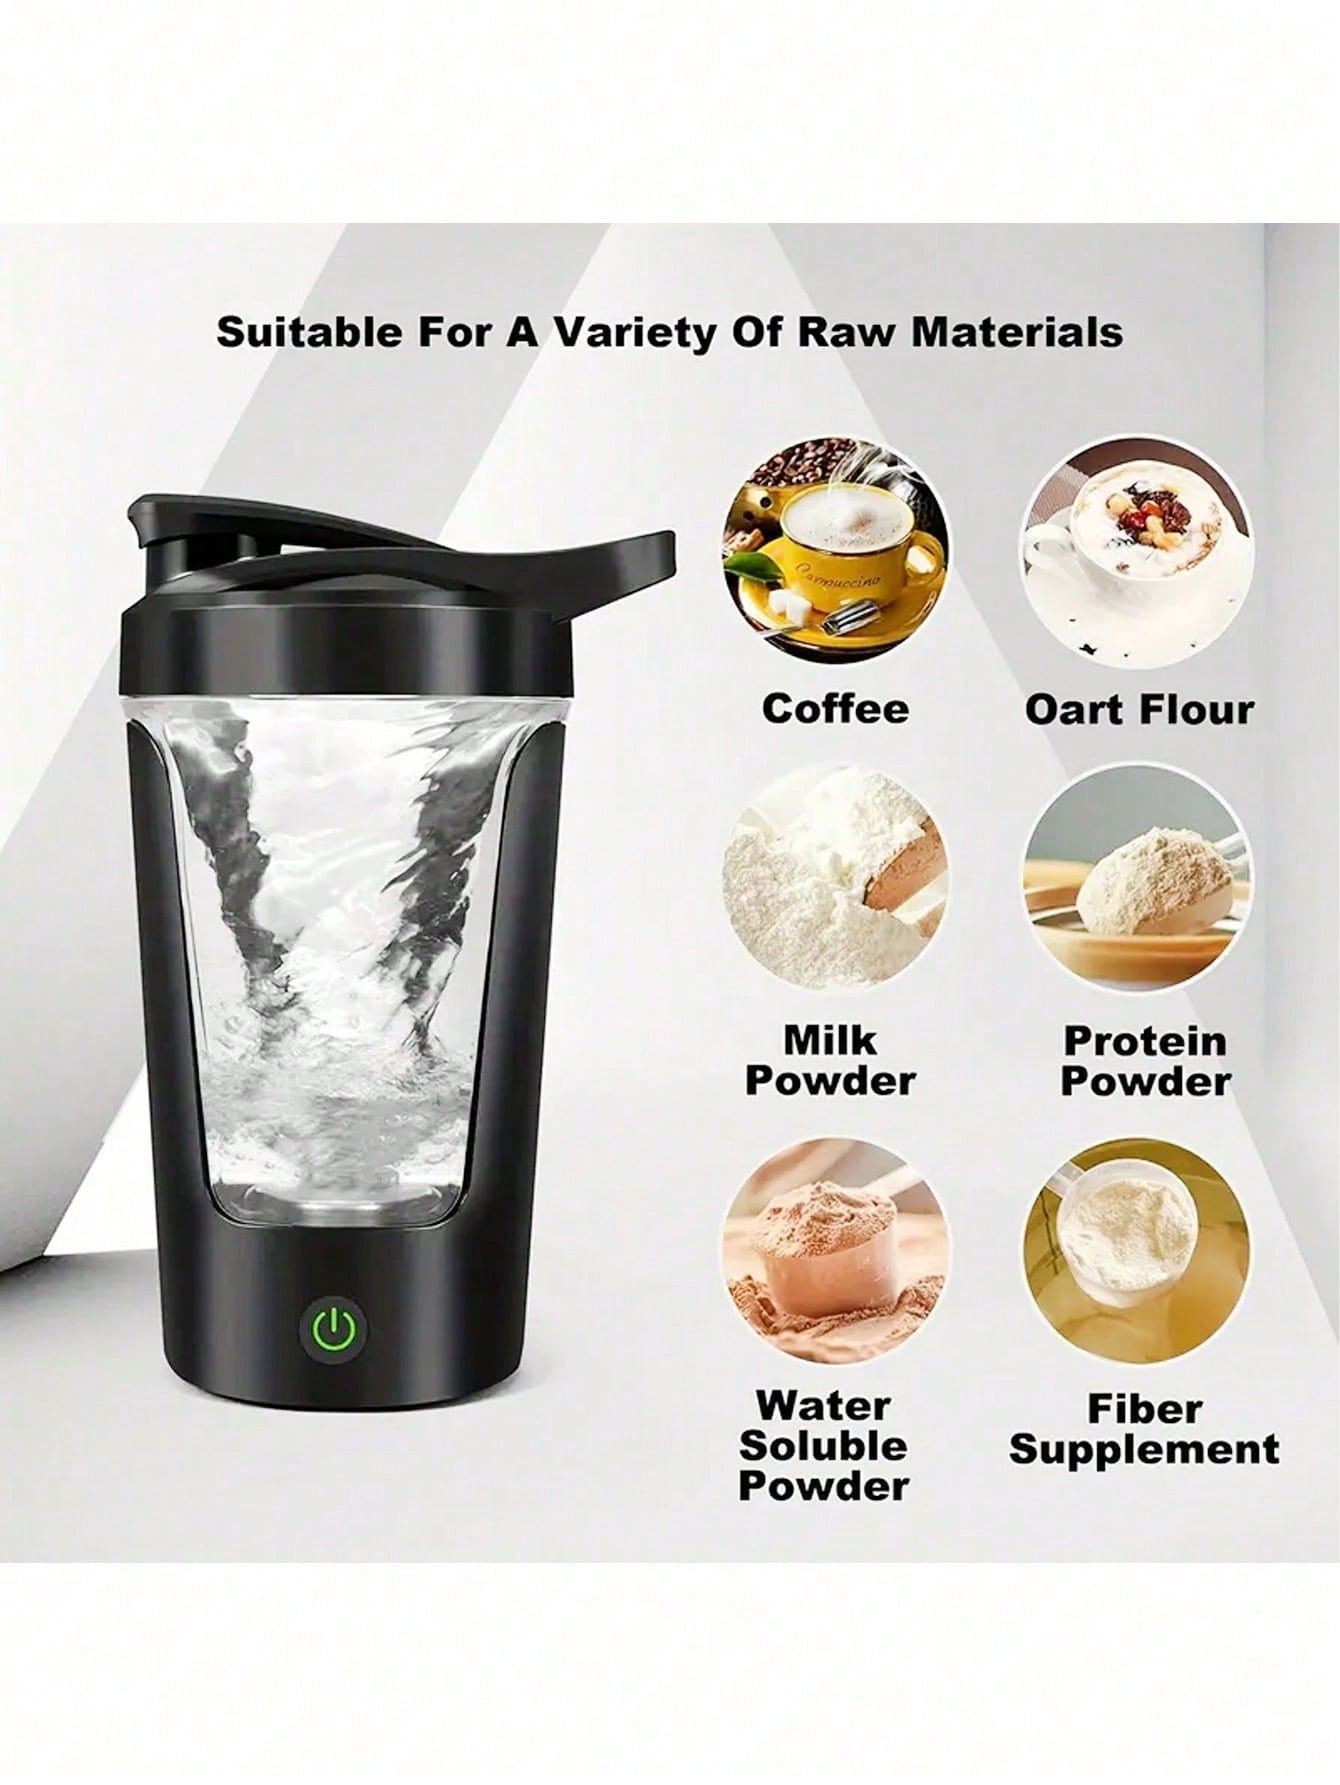 Shaker bottle electric protein shake USB charging blender cup sports and  fitness